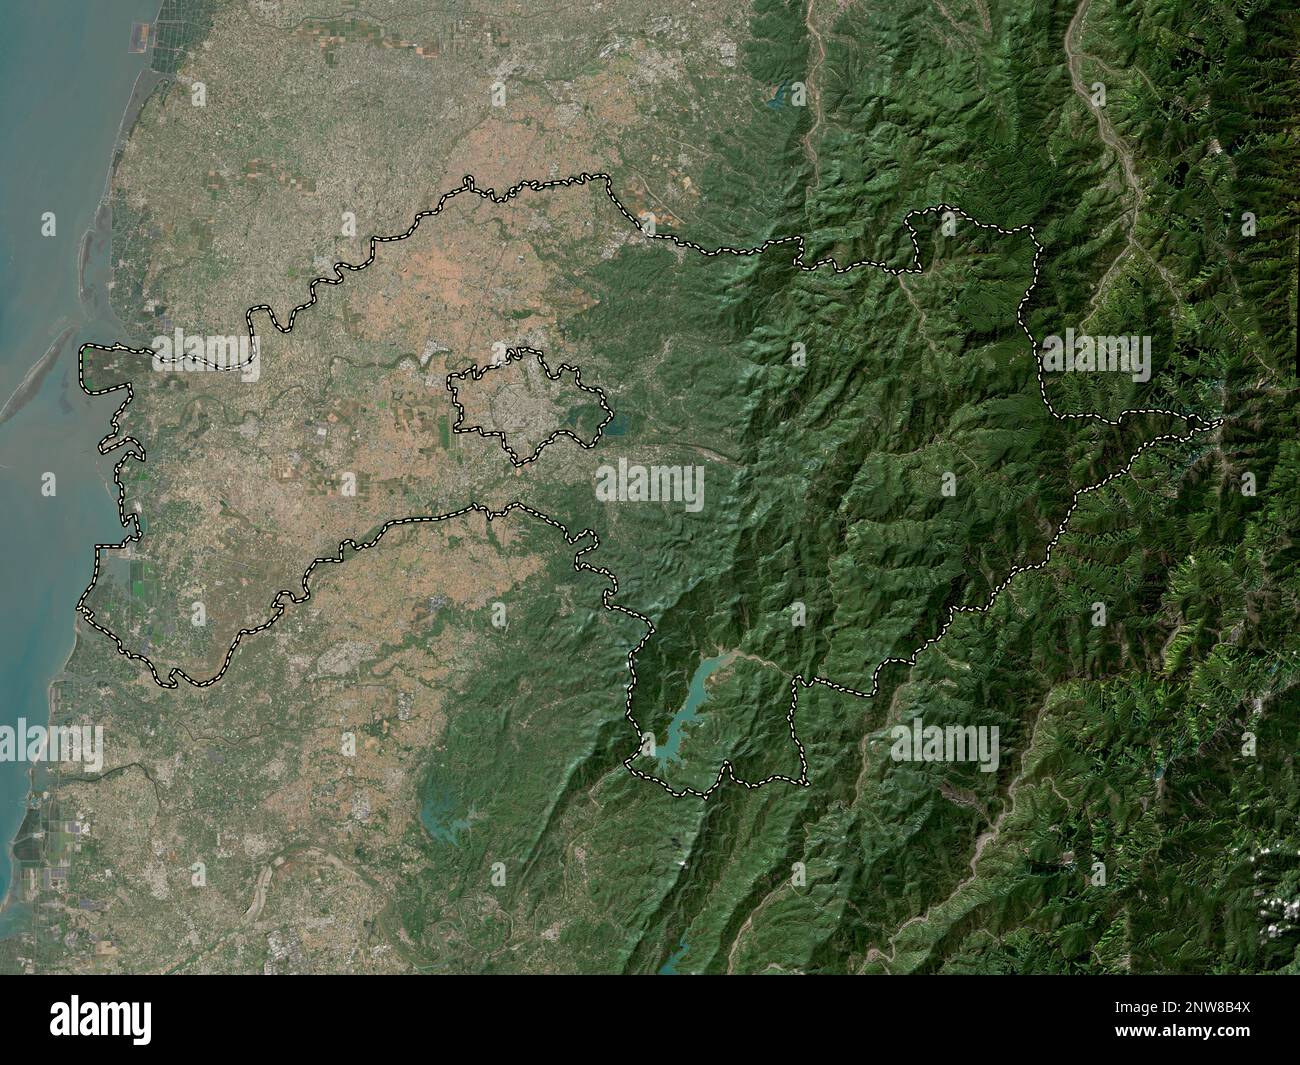 Chiayi, county of Taiwan. Low resolution satellite map Stock Photo